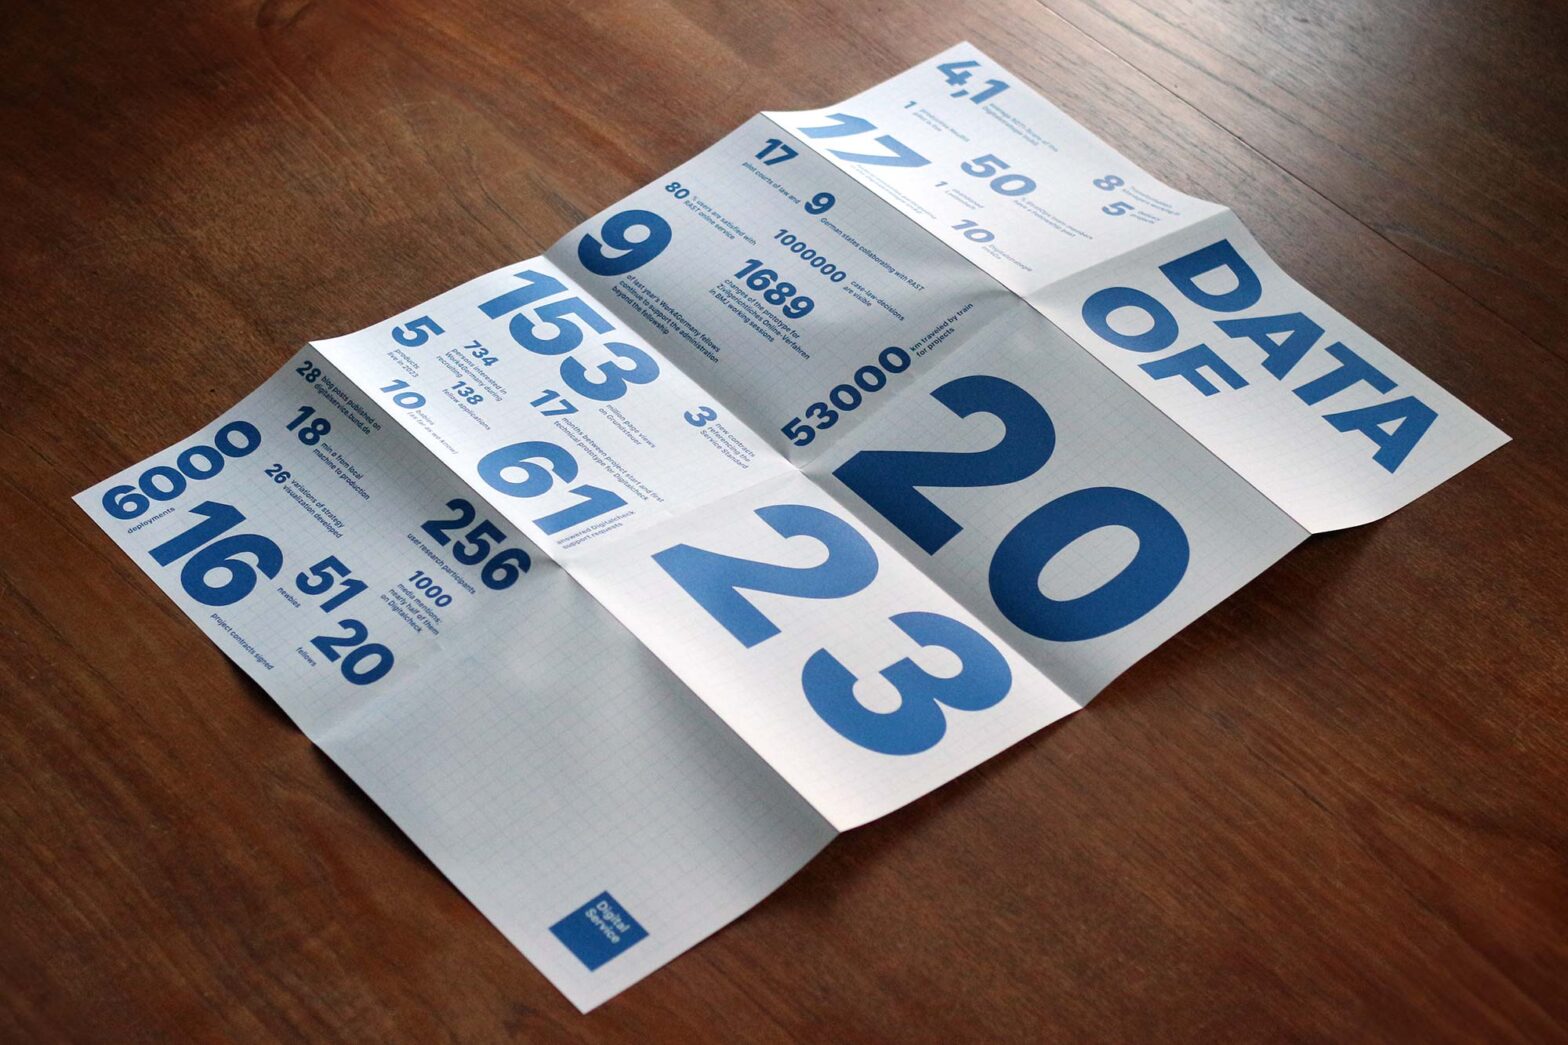 An unfolded poster in a dark wooden surface – in big letters it reads: Data of 2023 with some dozen smaller and bigger numbers and lines of text, like: 6000 deployments, 16 project contracts signed, 153 million page views for property tax declaration, 53000 kilometres travelled by train for projects, 3 new contracts referencing the service standard